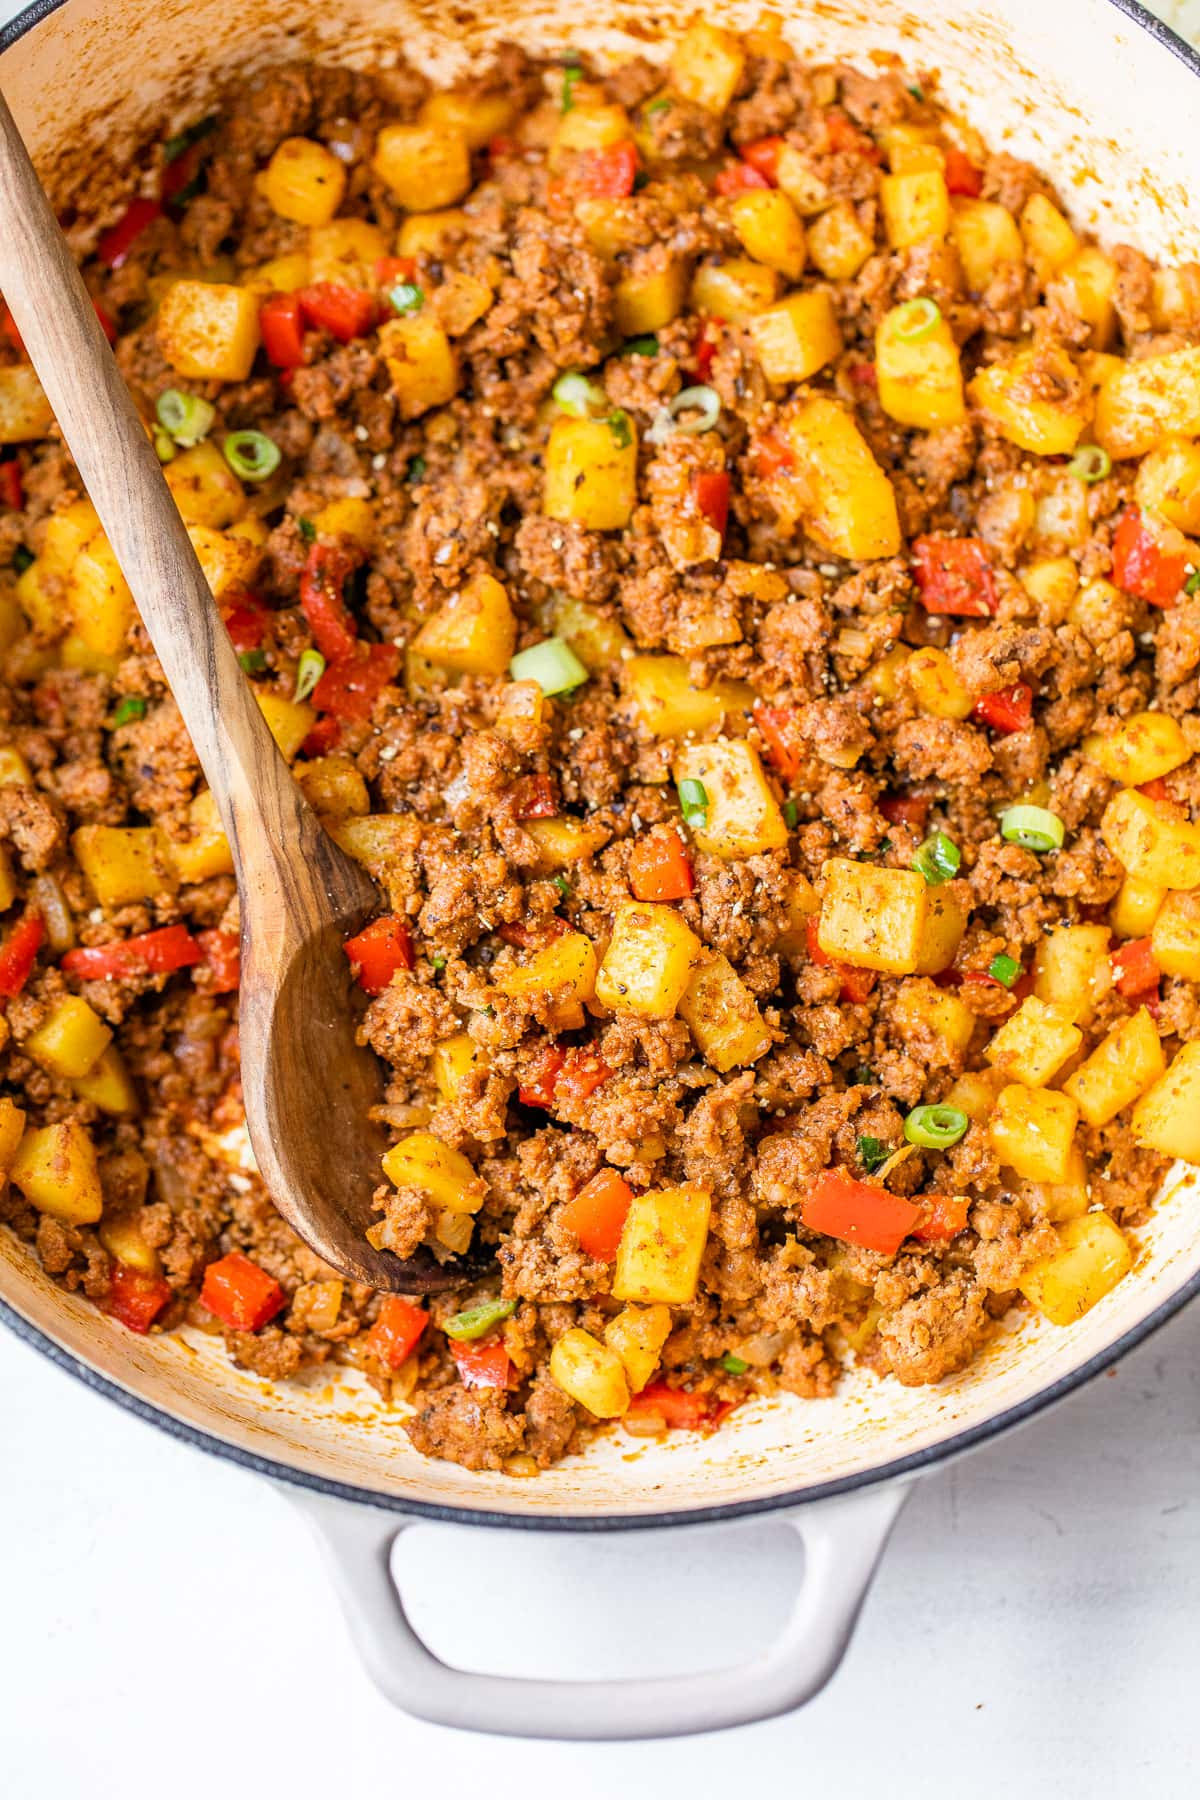 Ground Beef and Potato Recipe Elegant Ground Beef and Potatoes Simple Skillet Meal